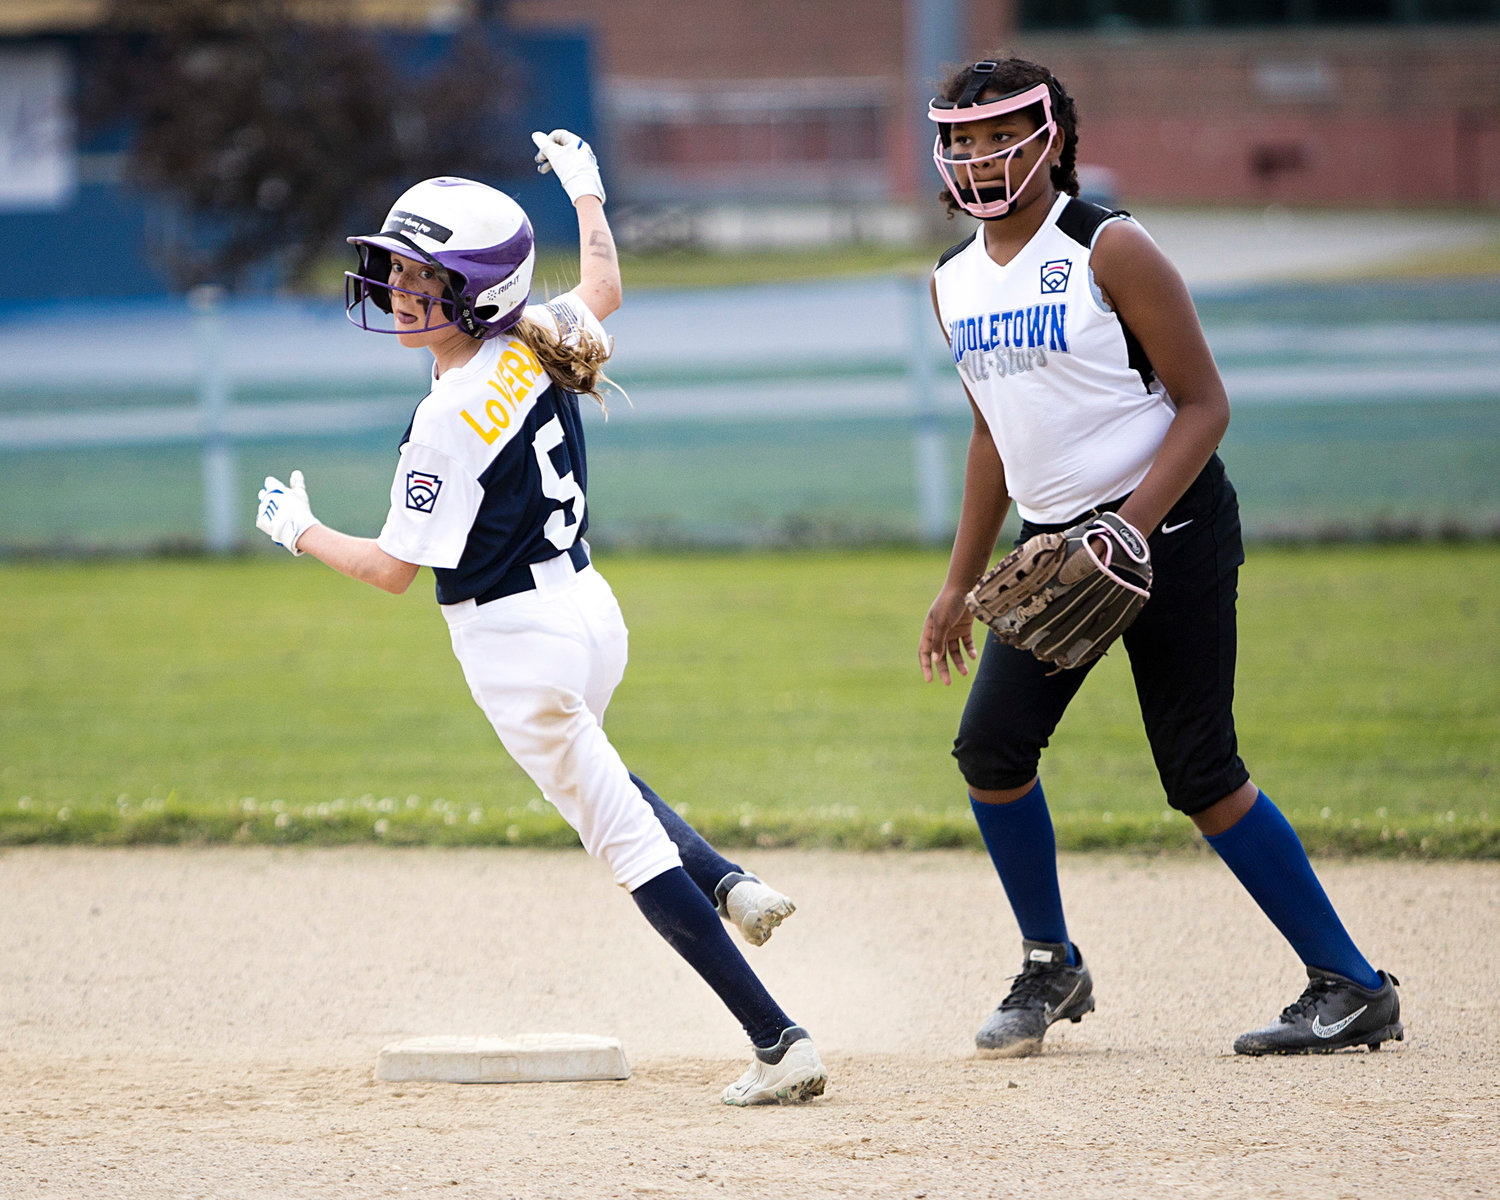 Emma Loverme watches for the ball as she rounds second base.